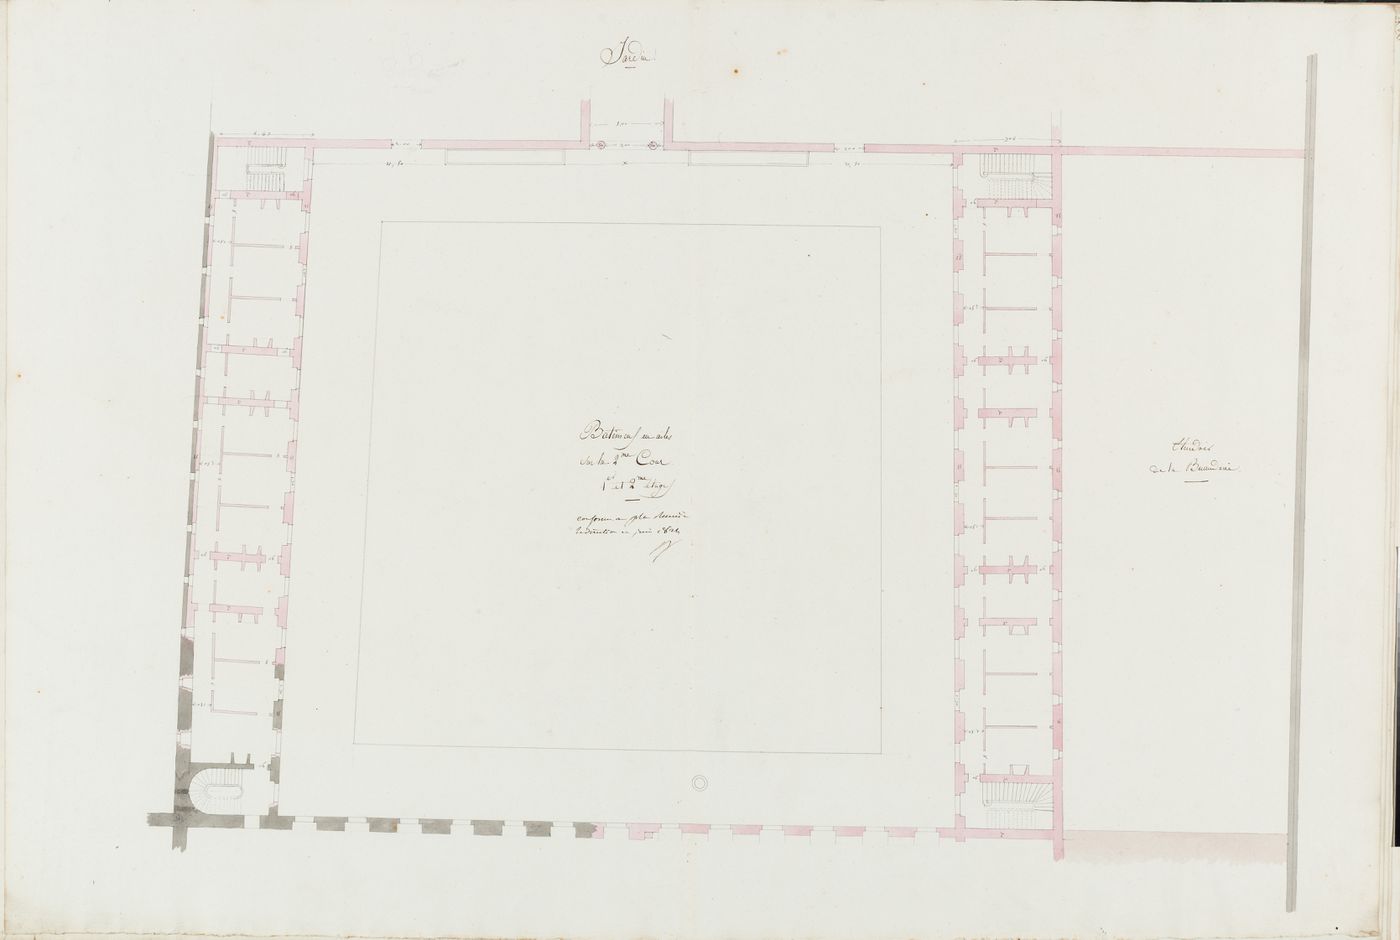 Project for the caserne de la Gendarmerie royale, rue Mouffetard: First and second floor plan for the buildings surrounding the second courtyard